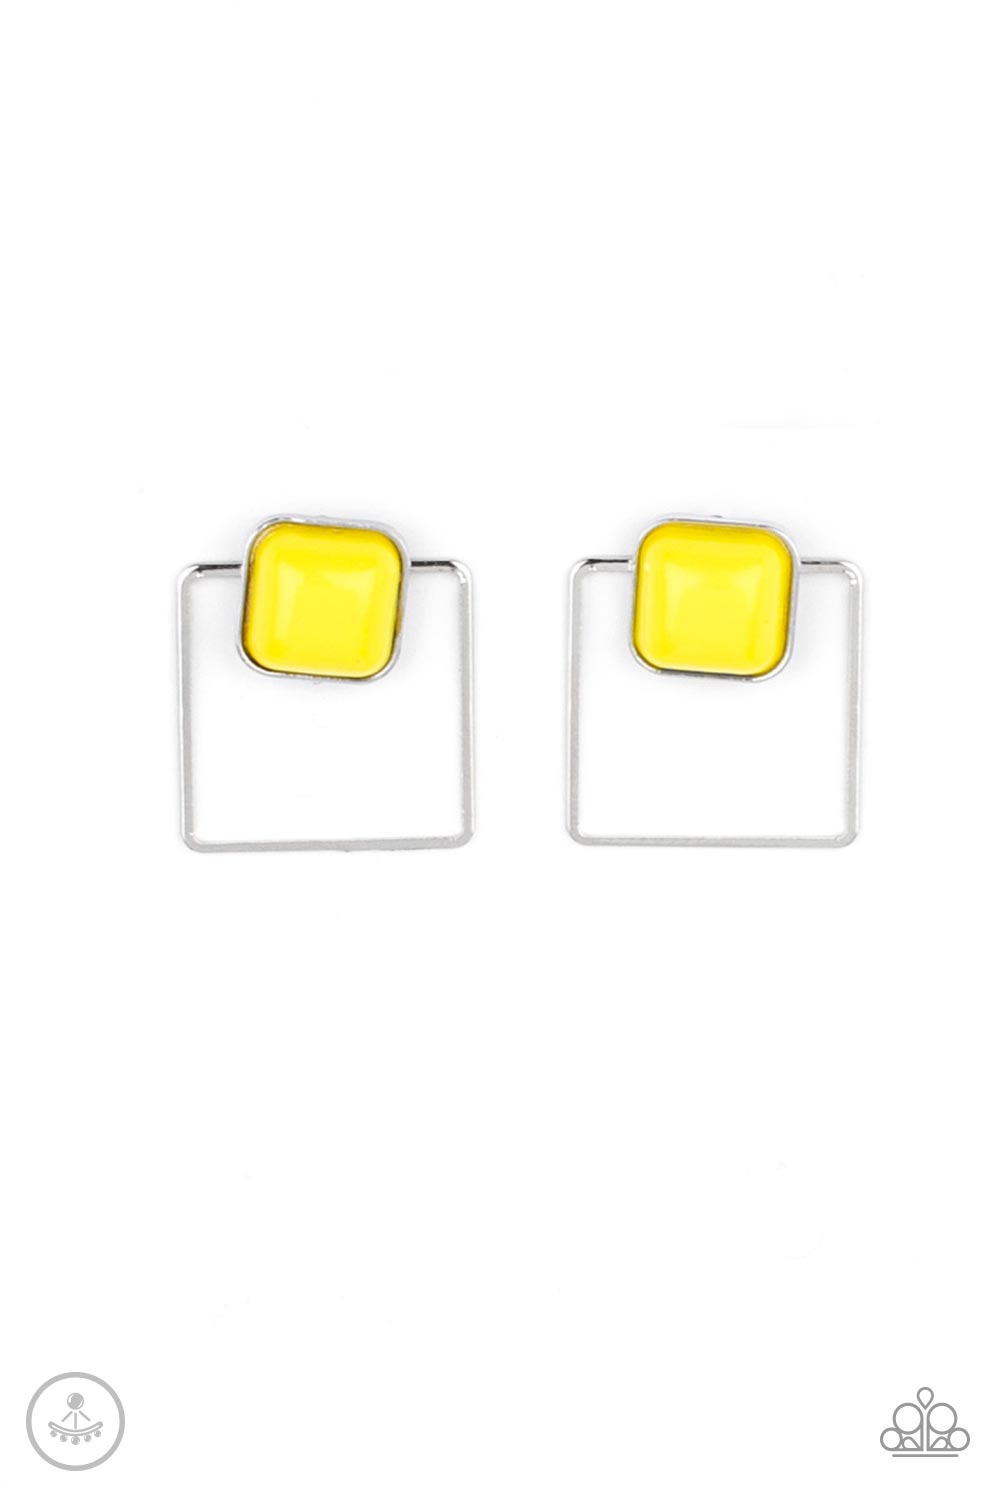 FLAIR and Square - Yellow Earrings - Paparazzi Accessories - Paparazzi Accessories 